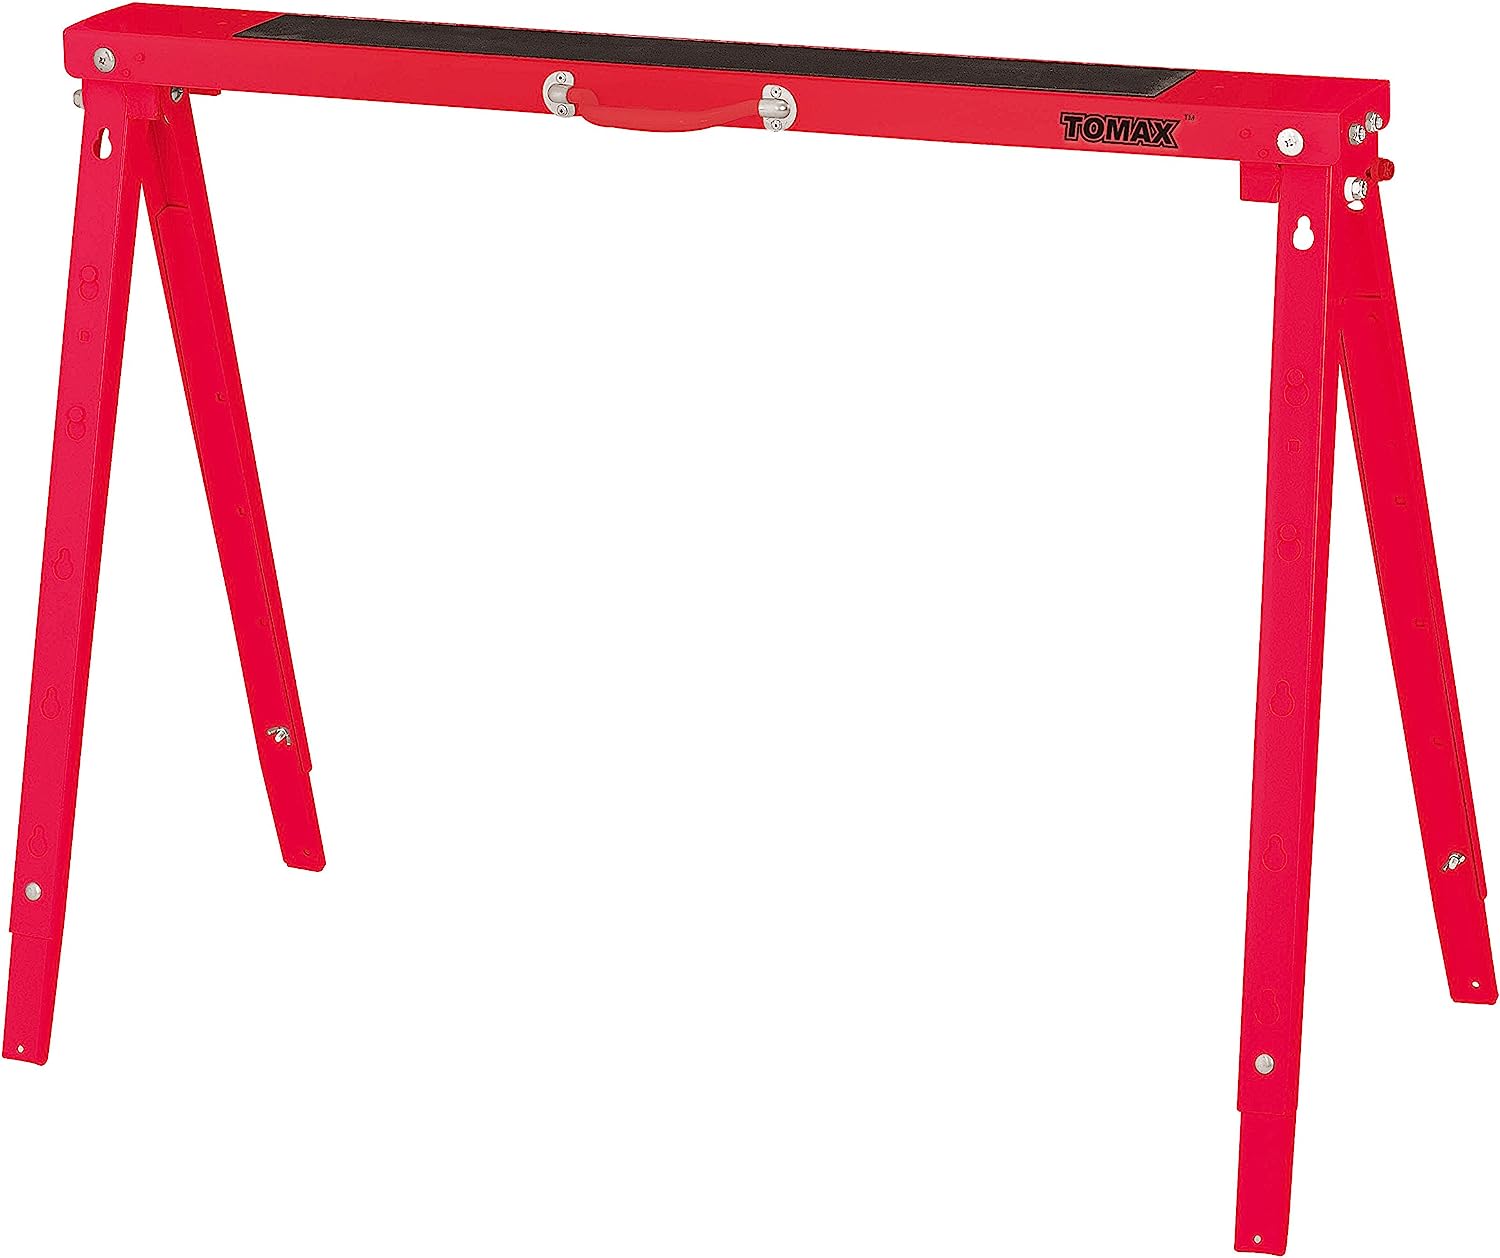 TOMAX Folding Sawhorse Height Adjustable 440lb Weight [...]